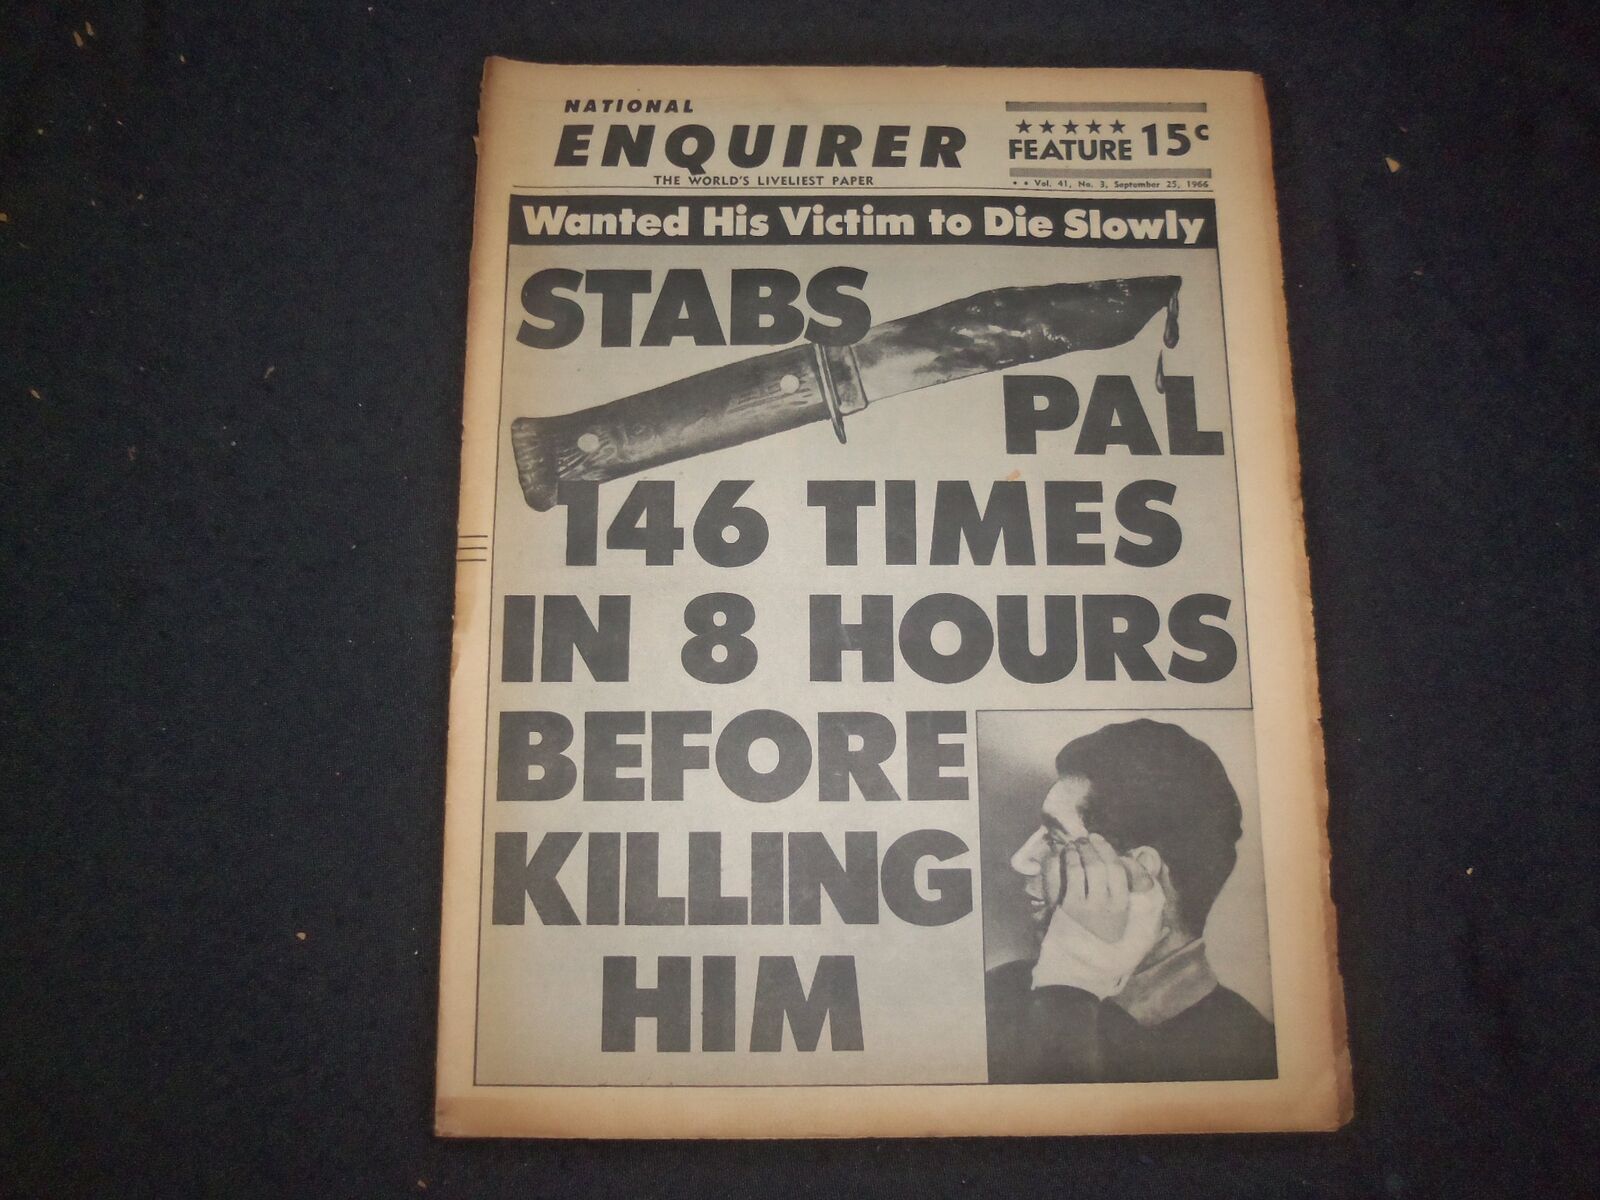 1966 SEP 25 NATIONAL ENQUIRER NEWSPAPER - STABS PAL 146 TIMES IN 8 HRS - NP 7423